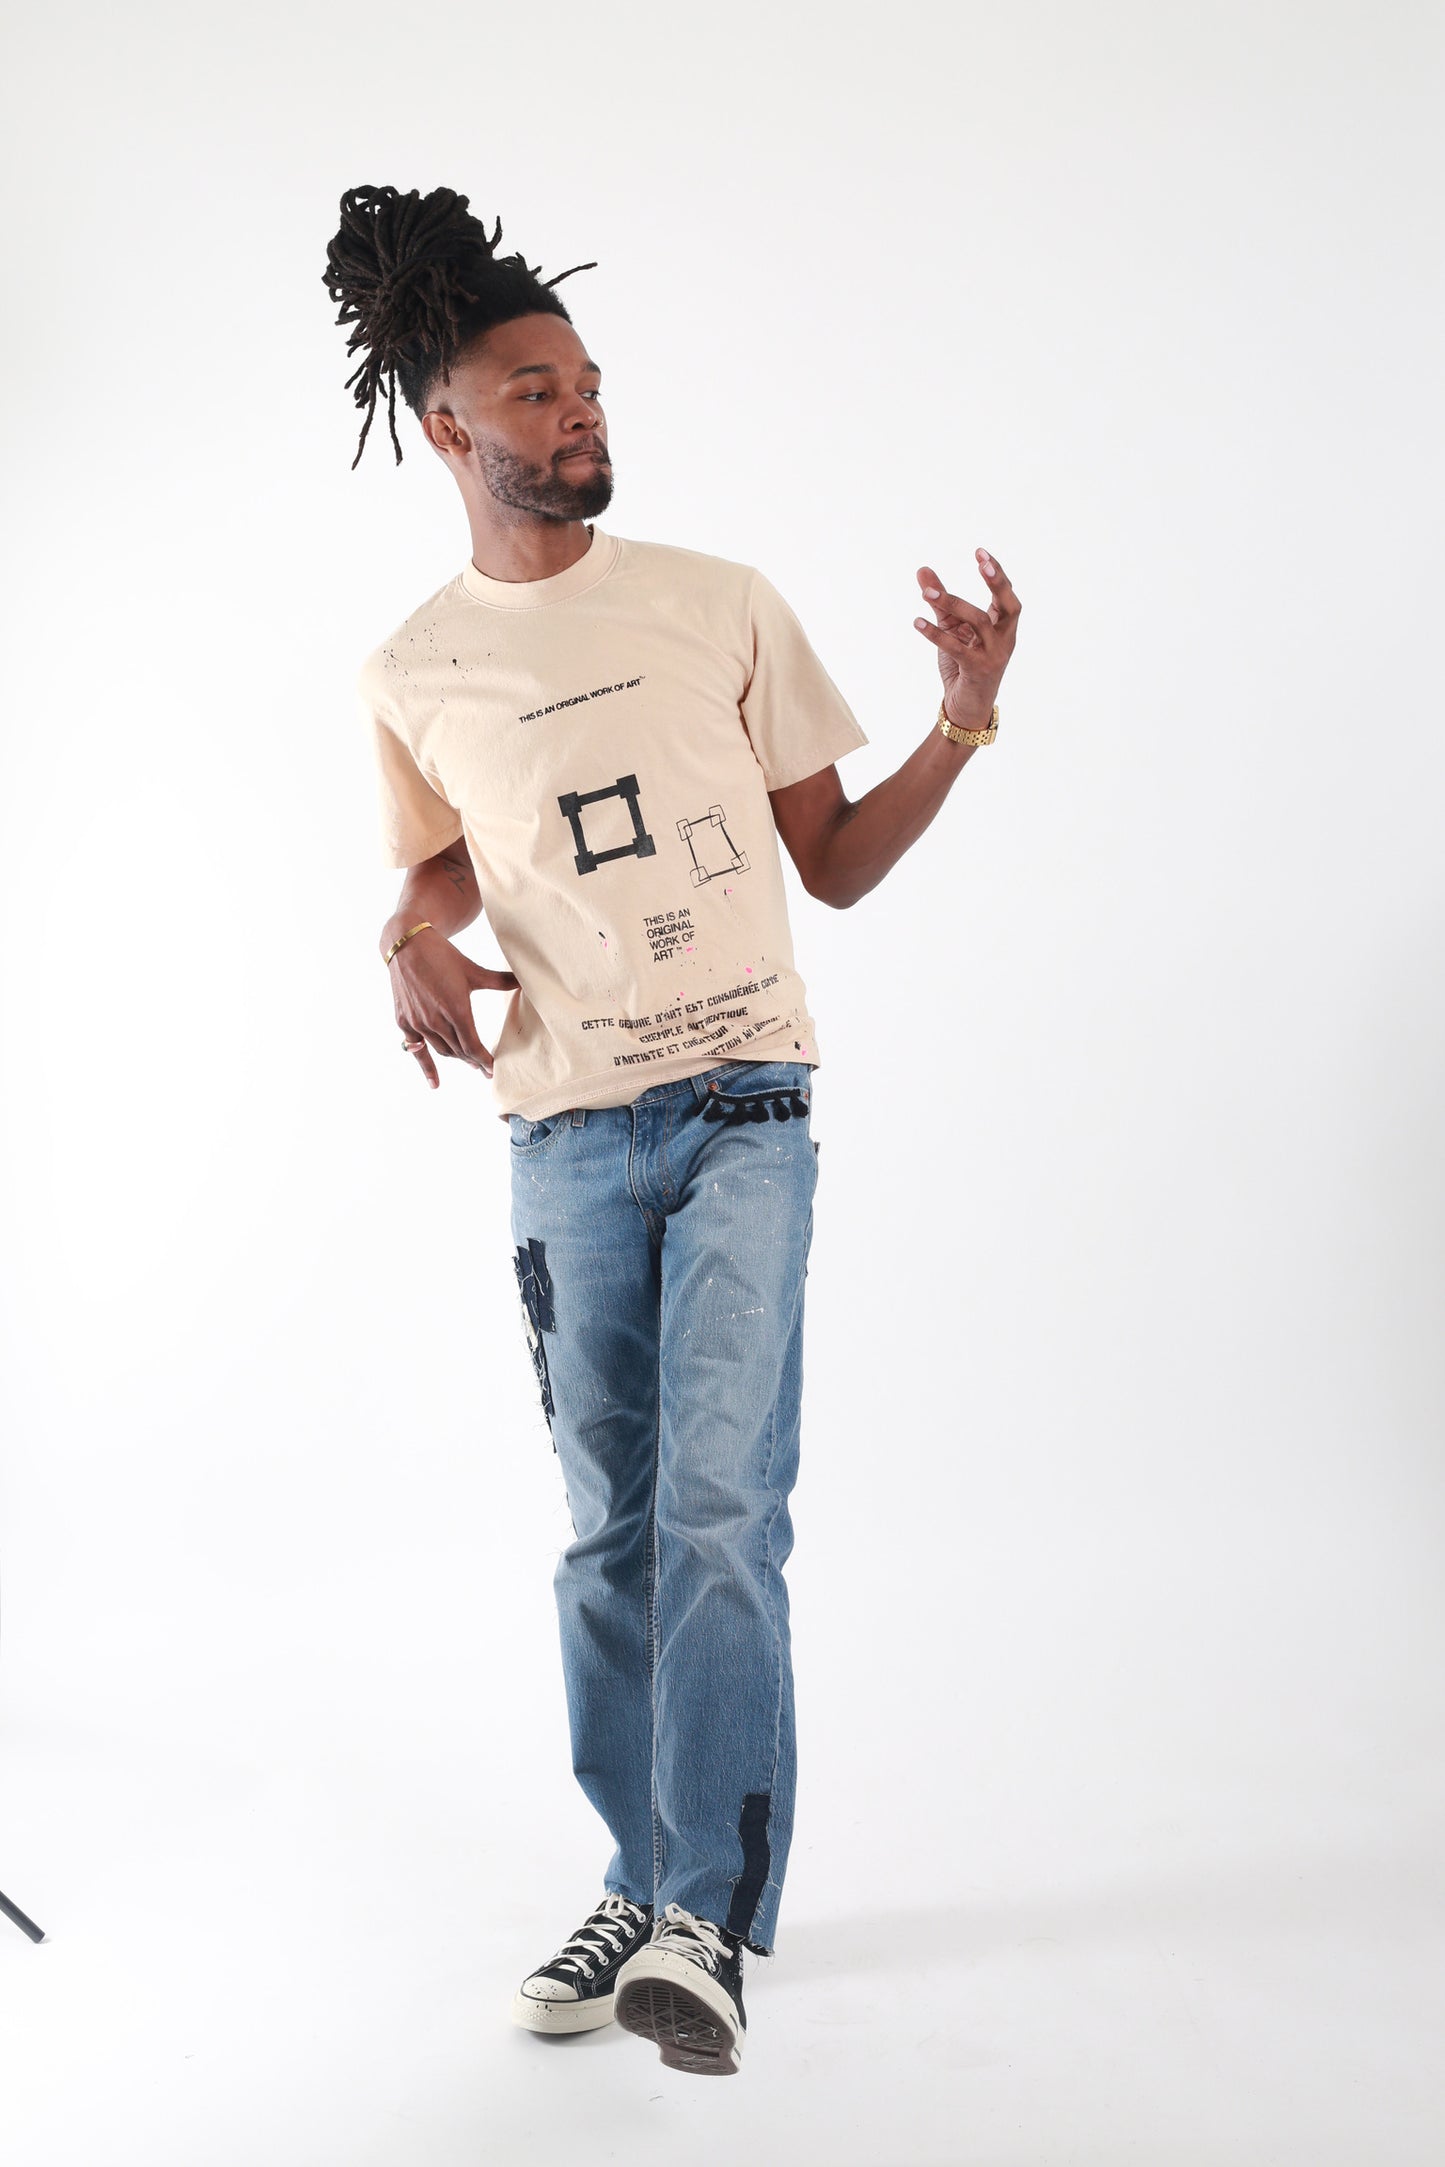 Desert Storm "think outside the box" Tee